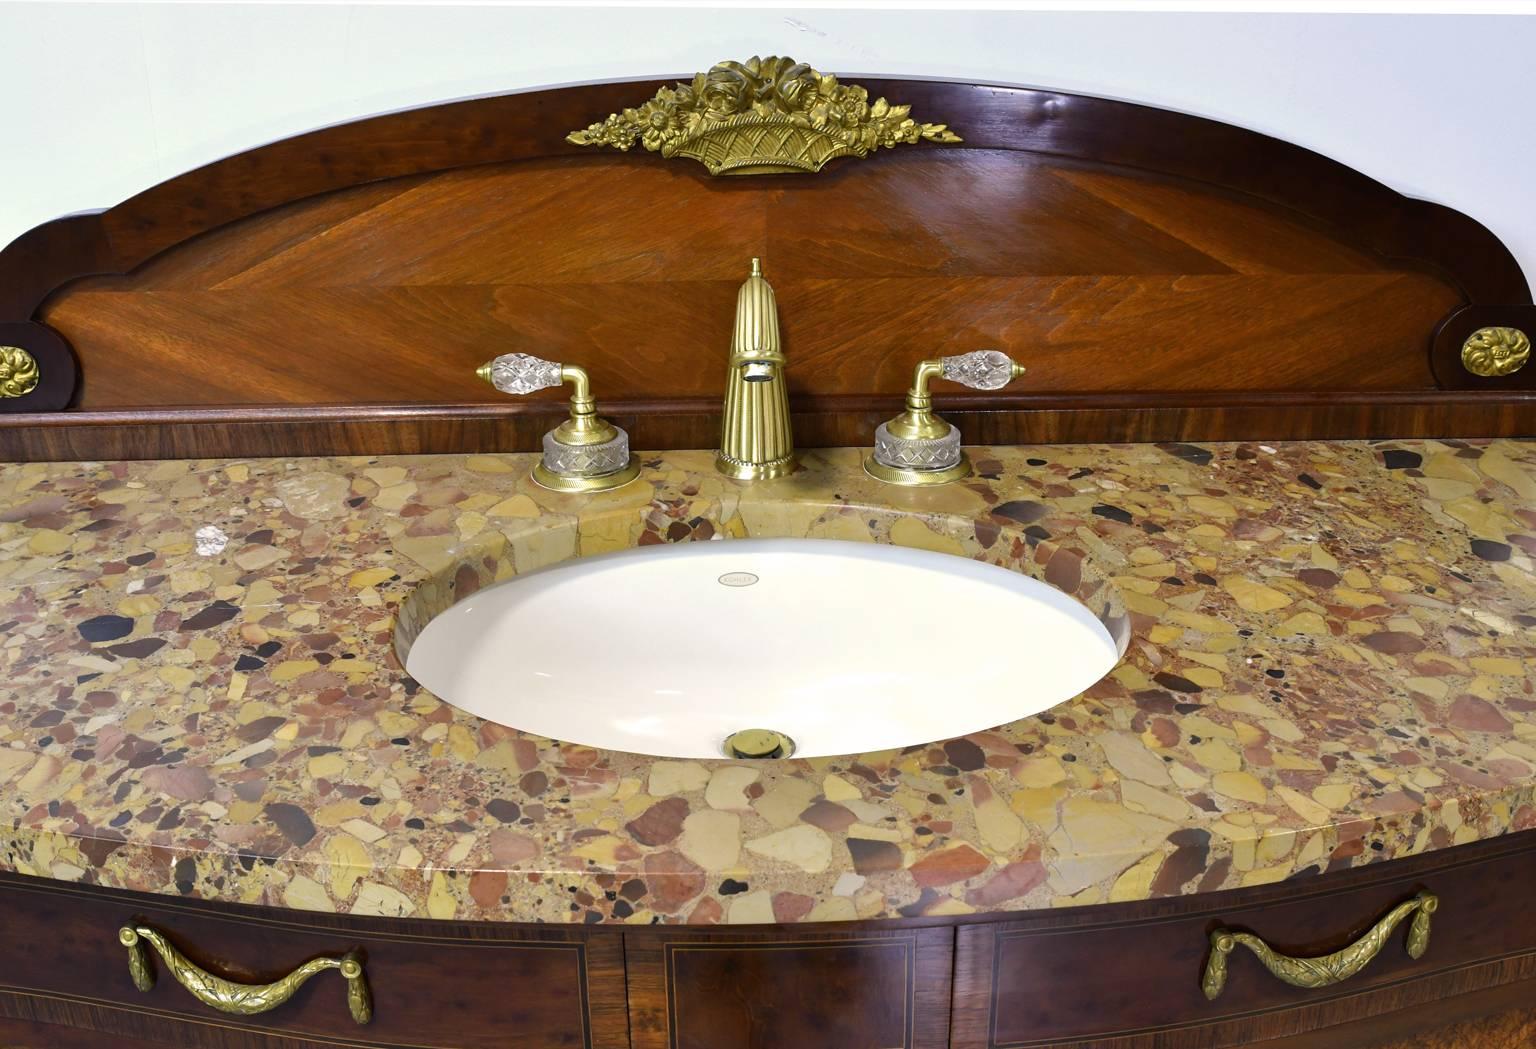 Bronze Pair of Antique French Empire-Style Bathroom Vanities with Ormolu & Marble Tops